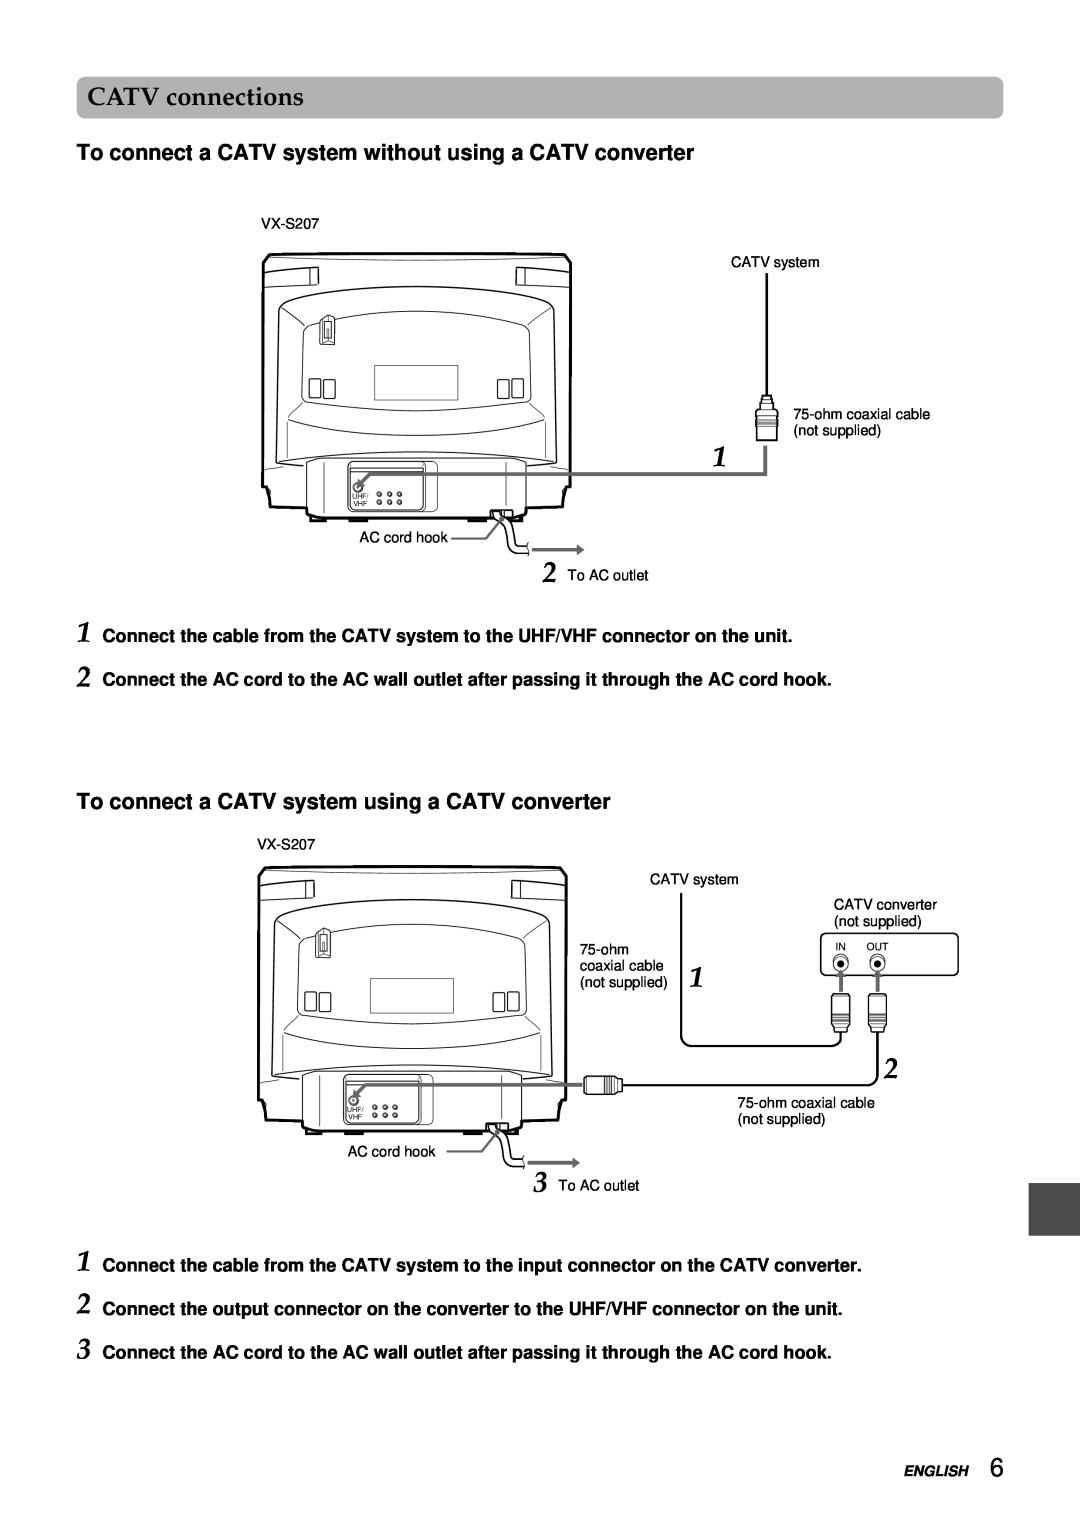 Aiwa VX-S207U, VX-S137U manual CATV connections, To connect a CATV system without using a CATV converter 